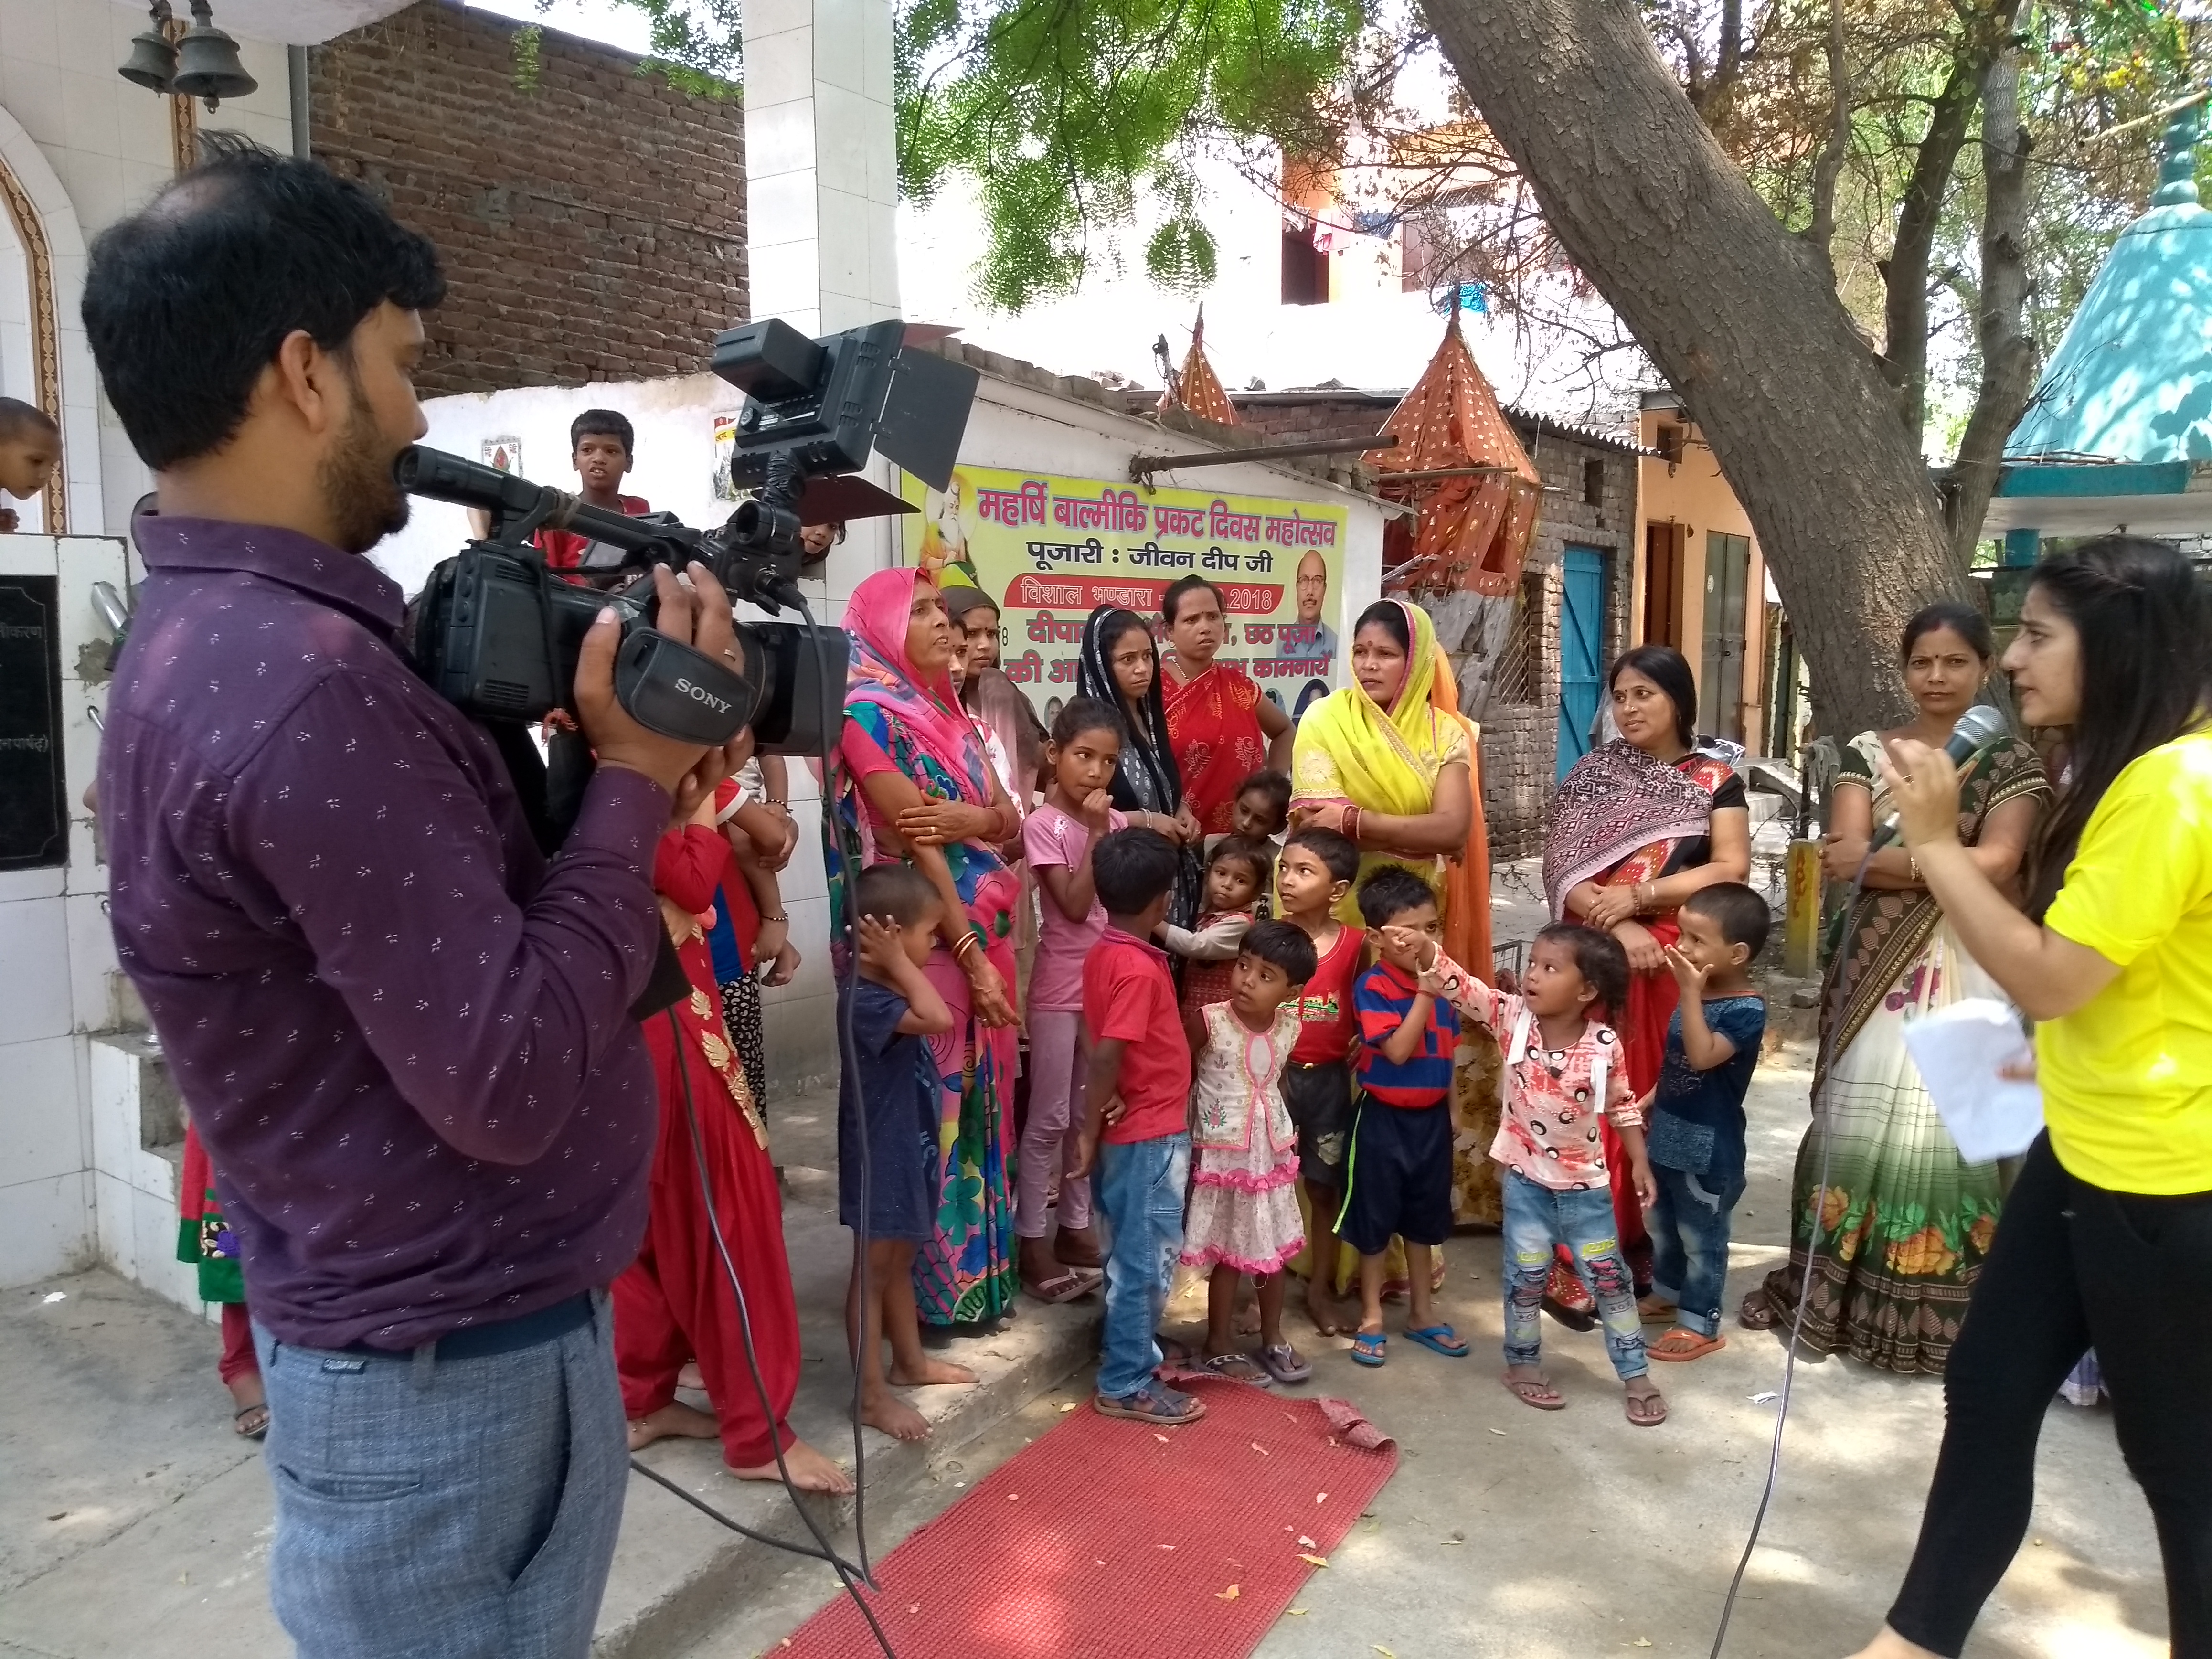 Man with a video camera filming a group of women and children